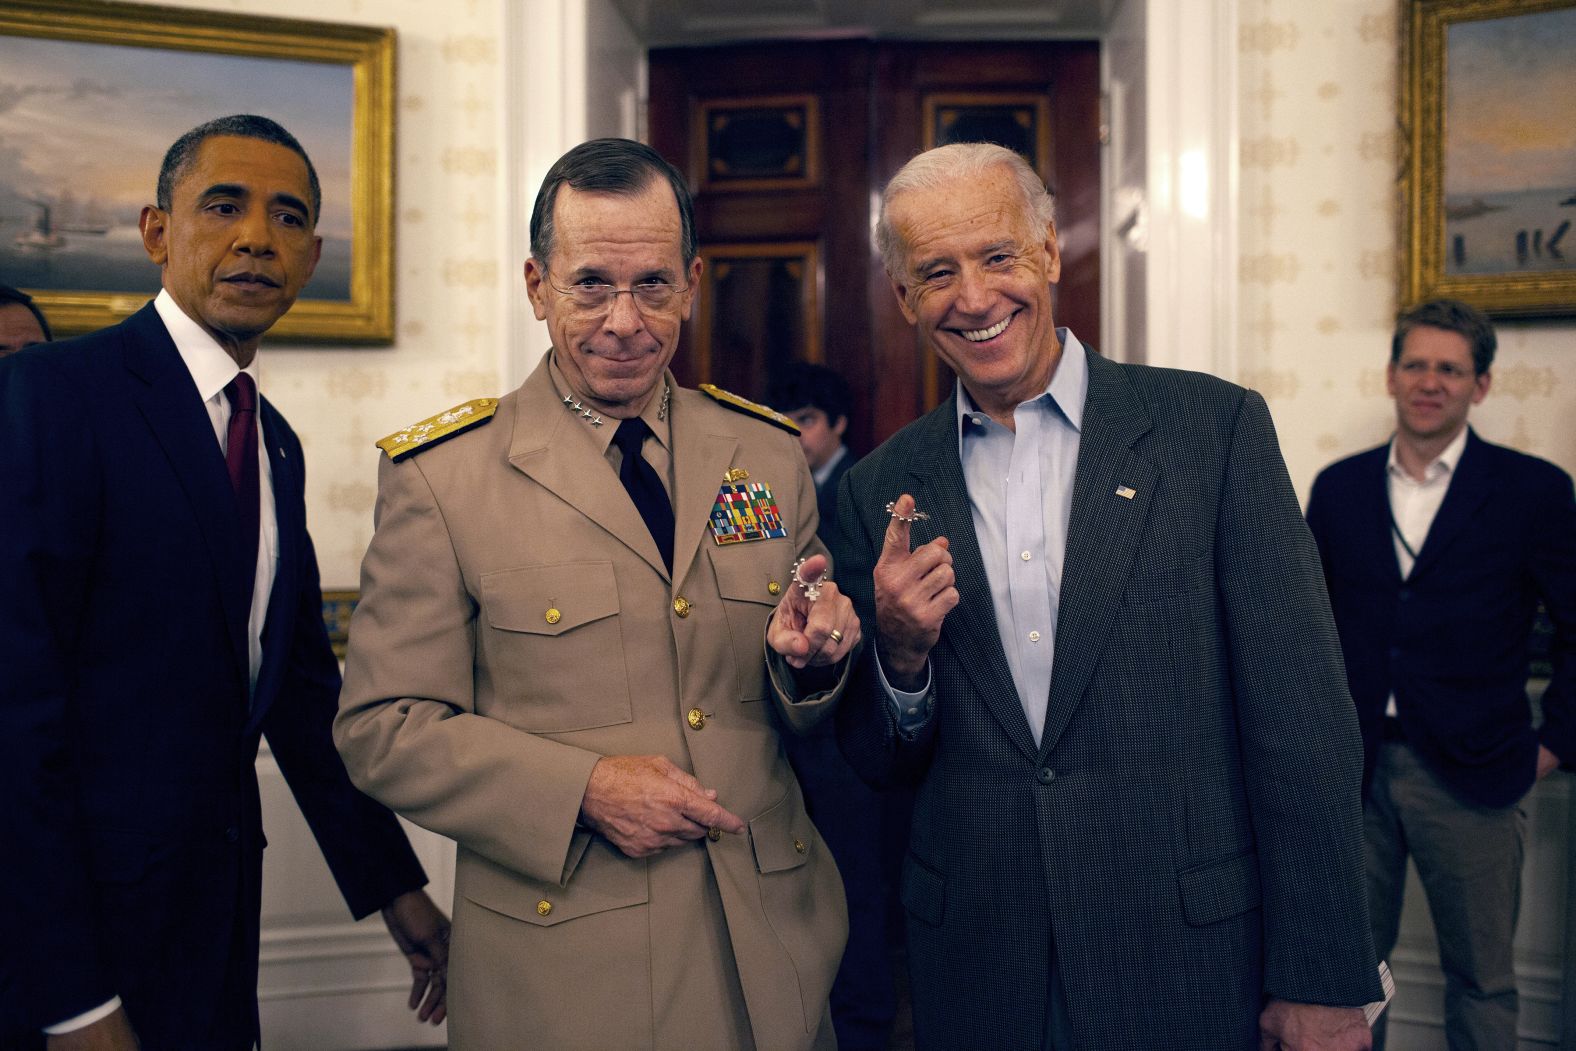 Chairman of the Joint Chiefs of Staff Adm. Mike Mullen celebrates with Biden following the mission.